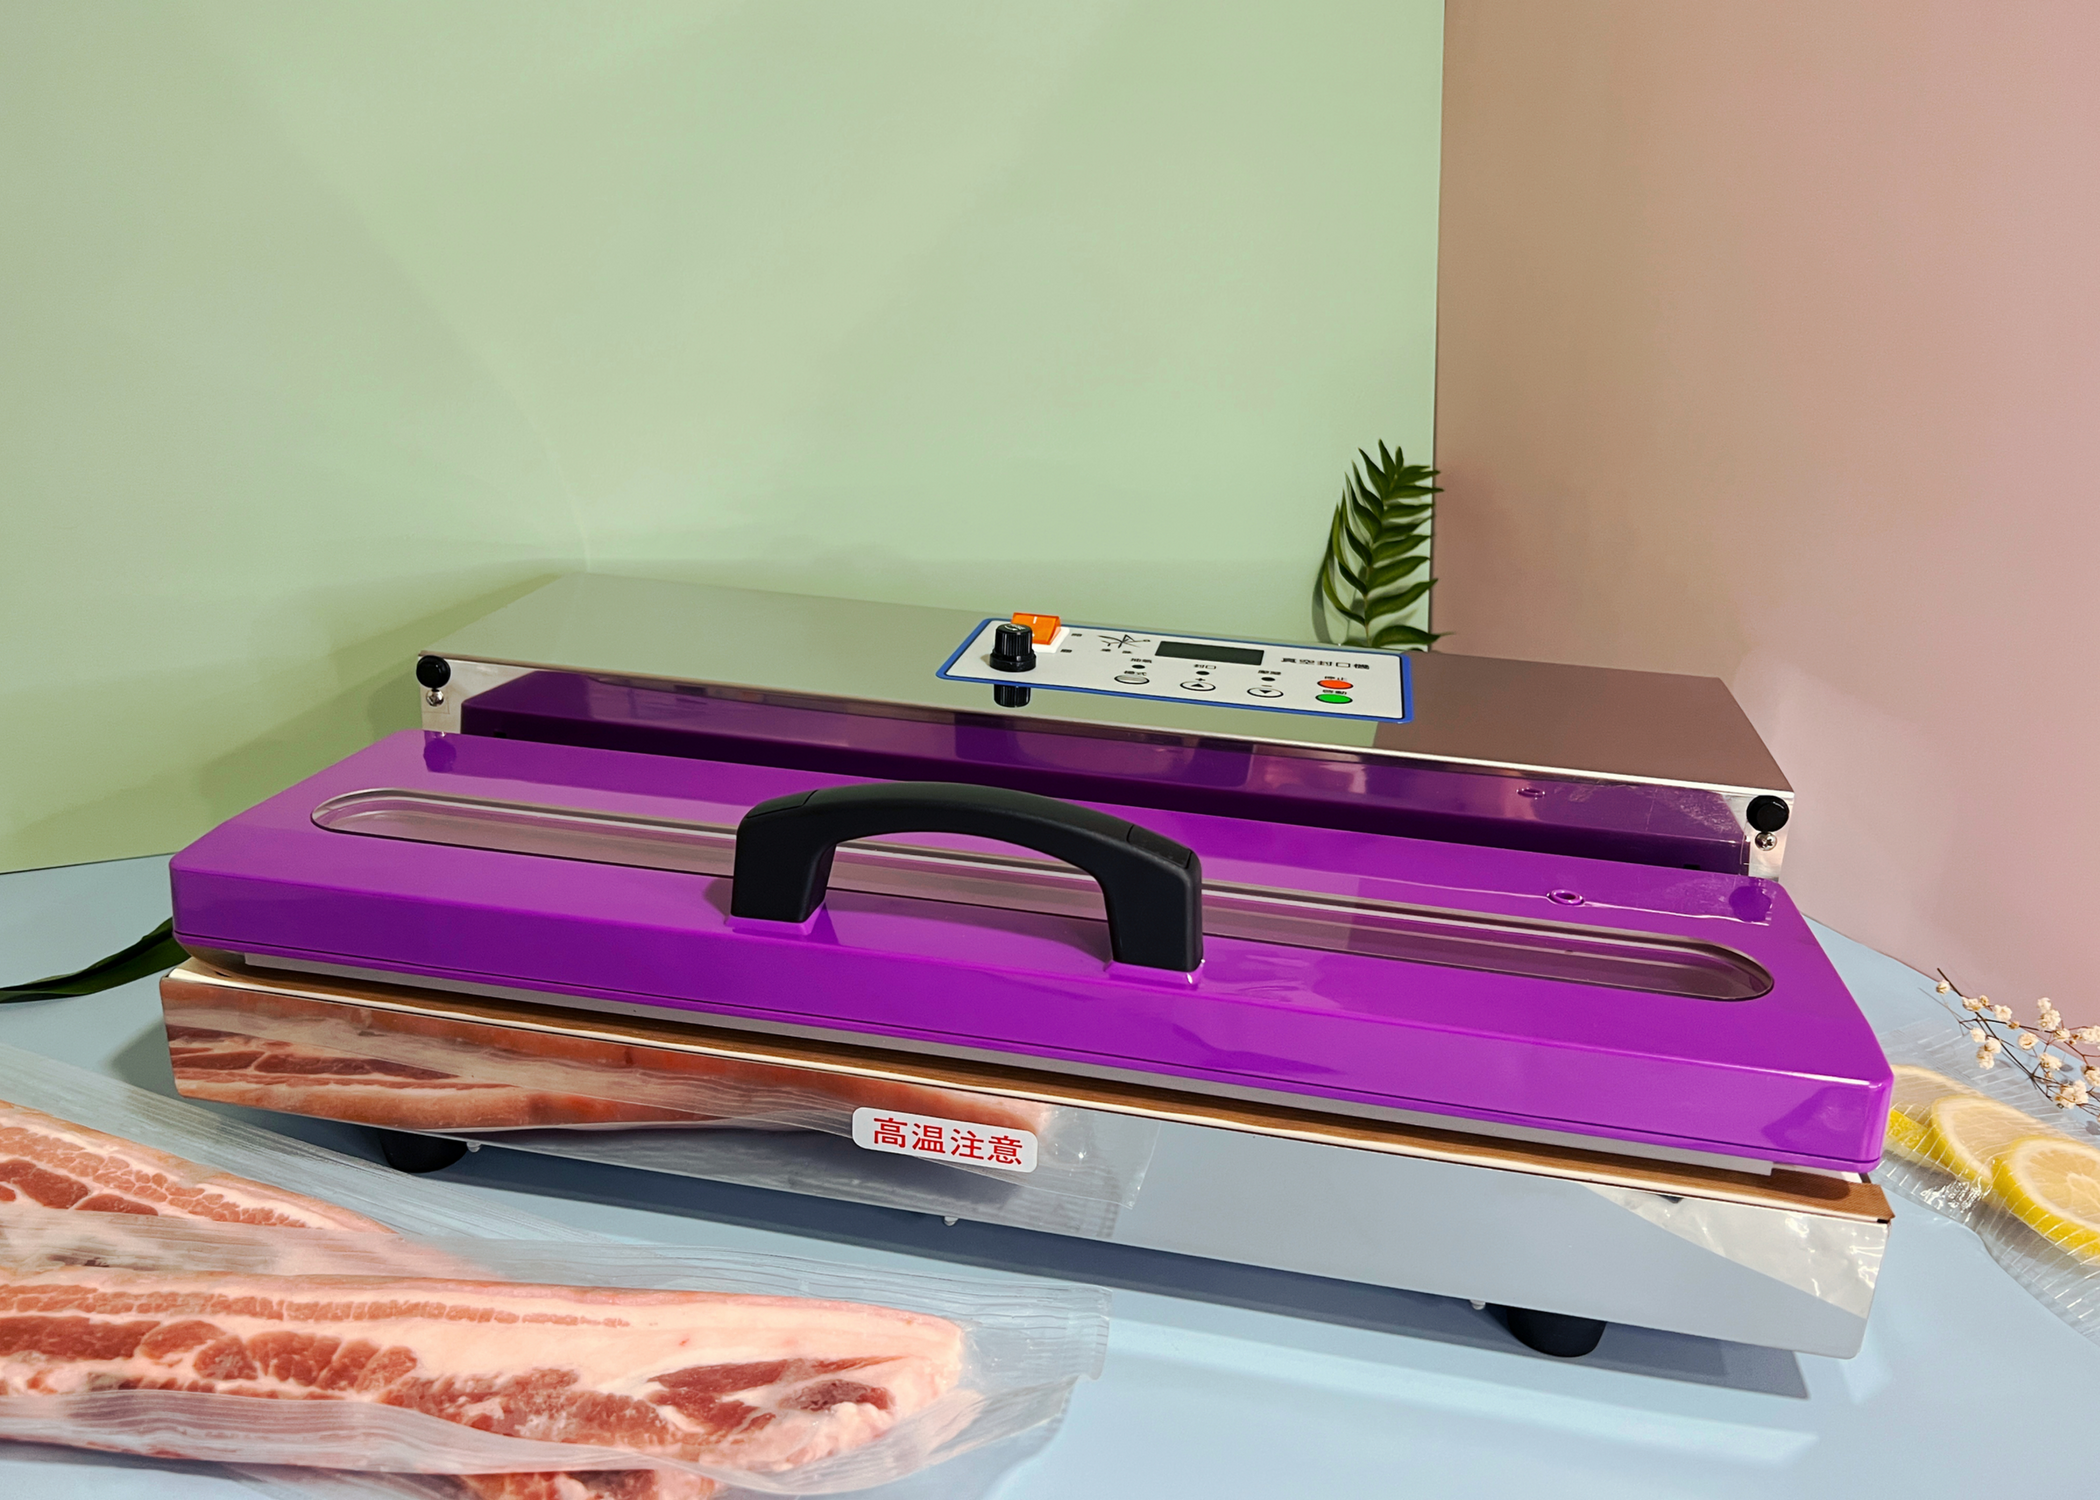 How to Use a Vacuum Sealer?